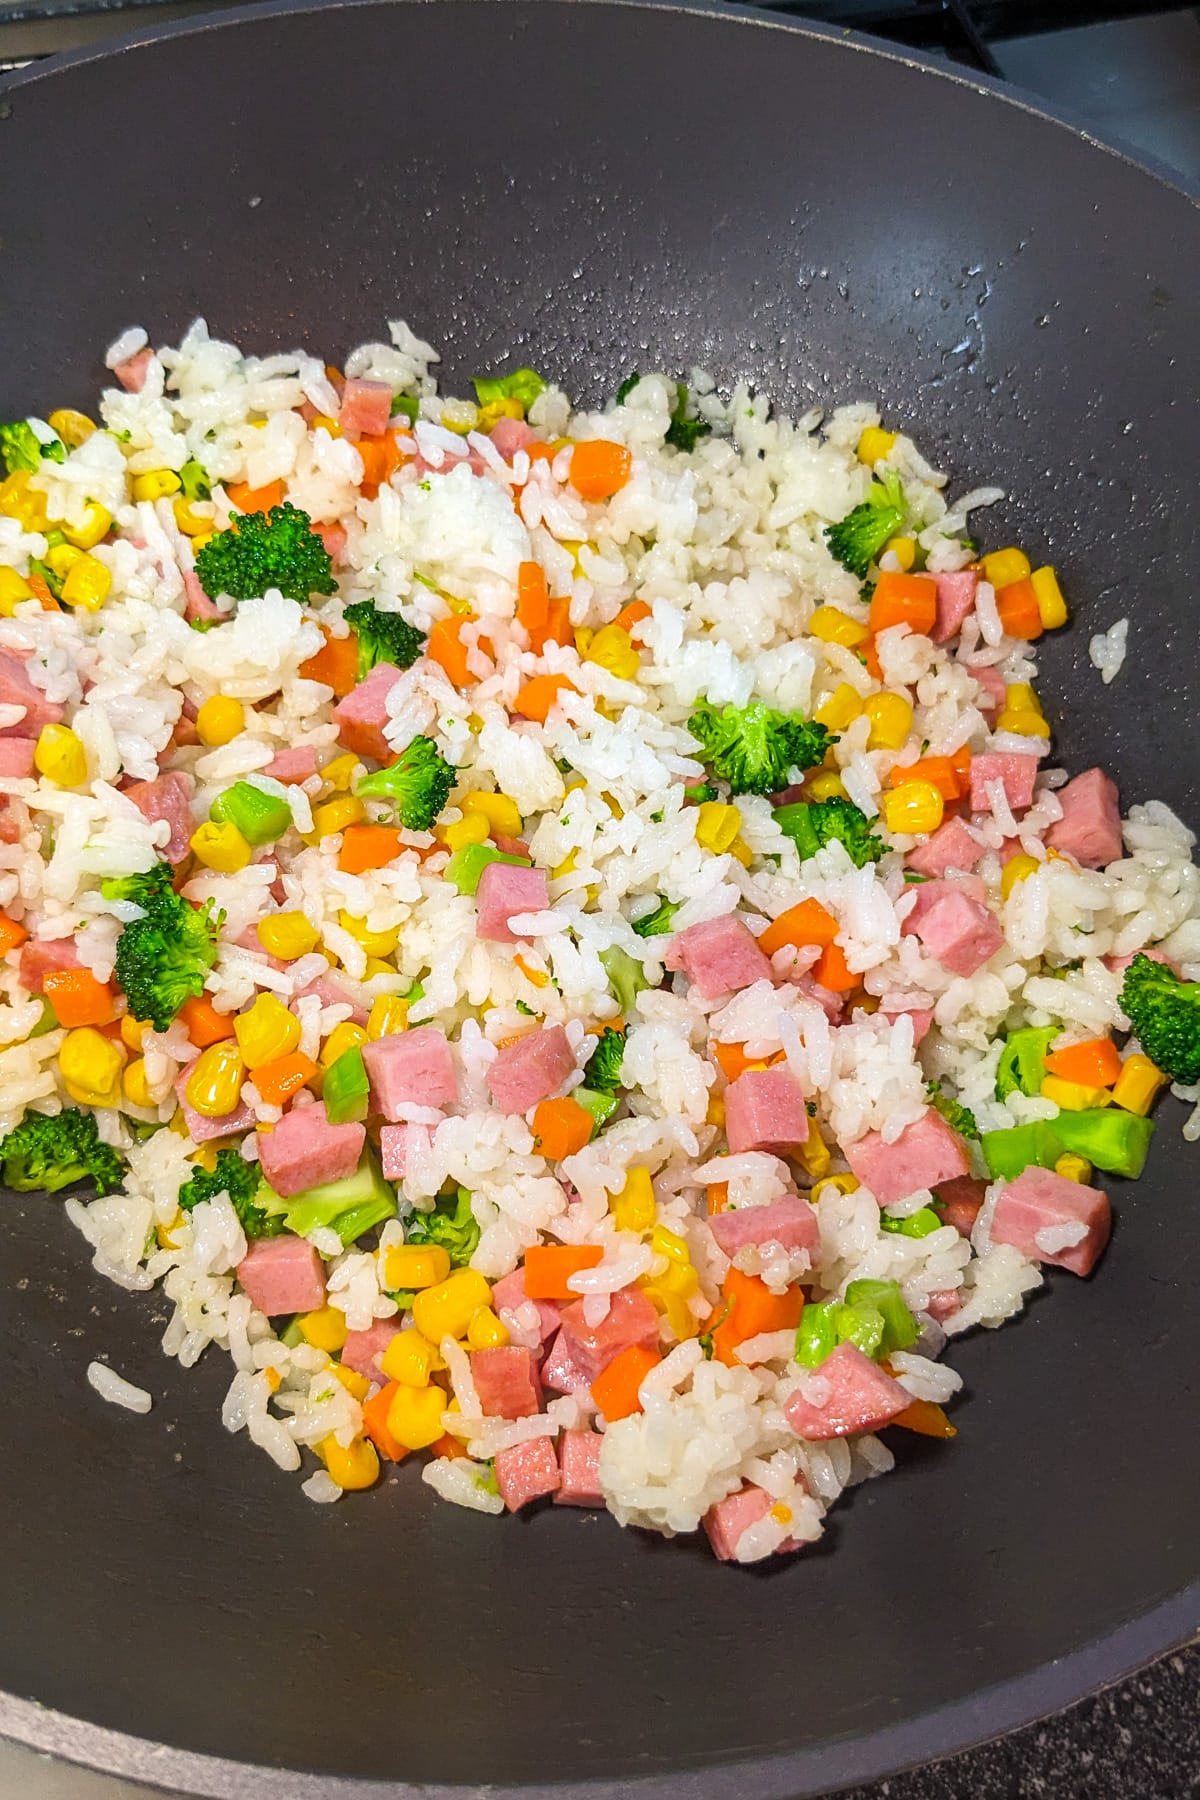 Leftover rice with veggies, luncheon meat in a wok.